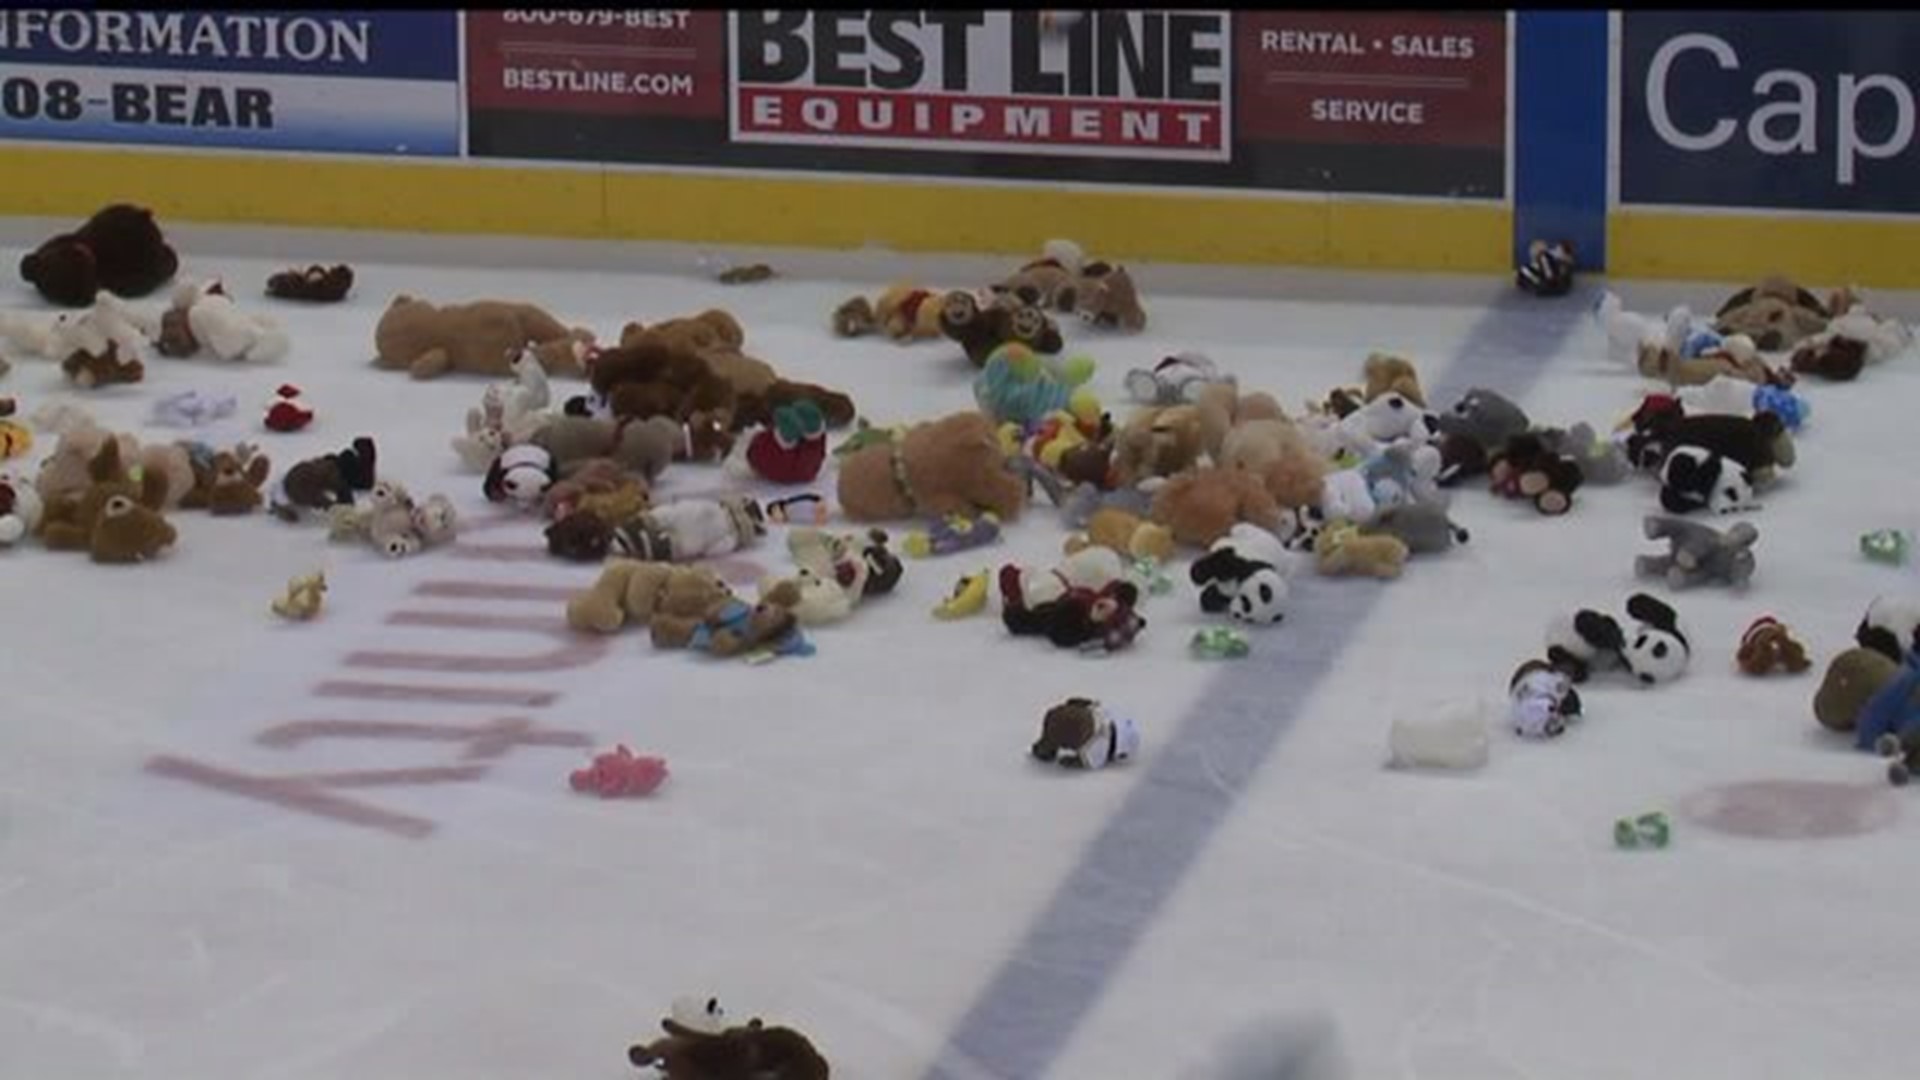 Hershey Bears knock out donation goal for teddy bear toss event